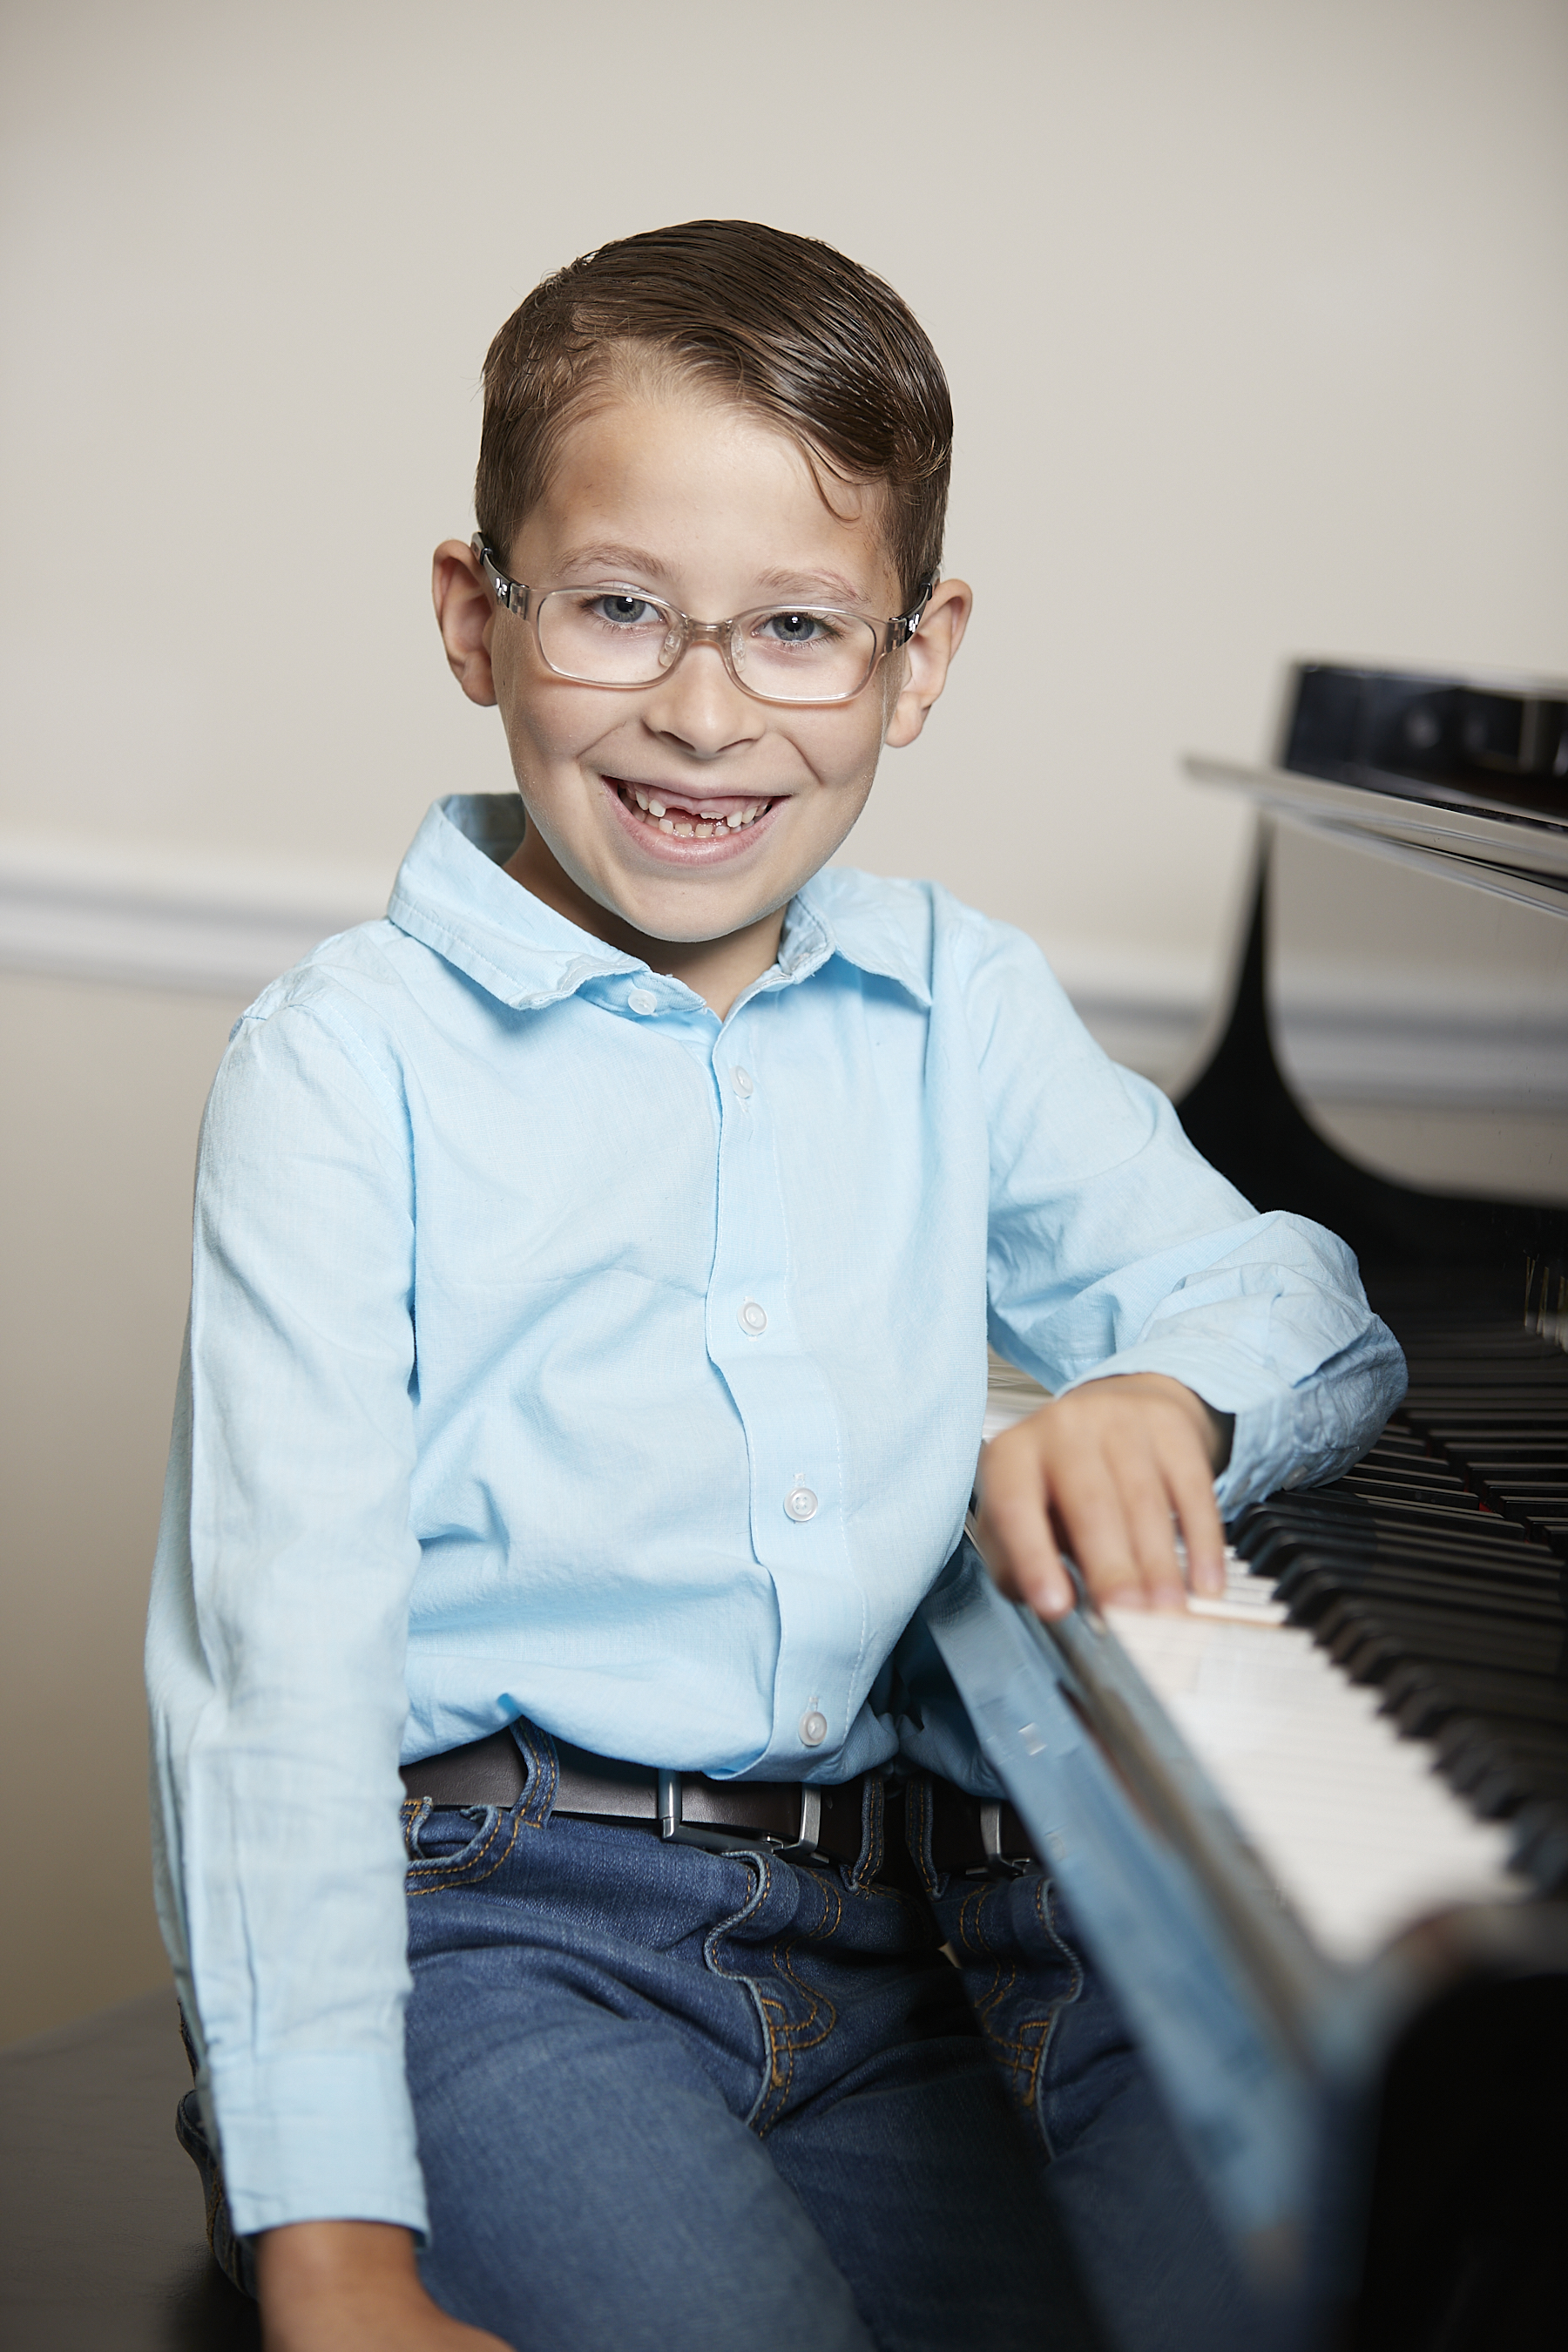 Piano Lessons for Kids at Dallas Piano Academy